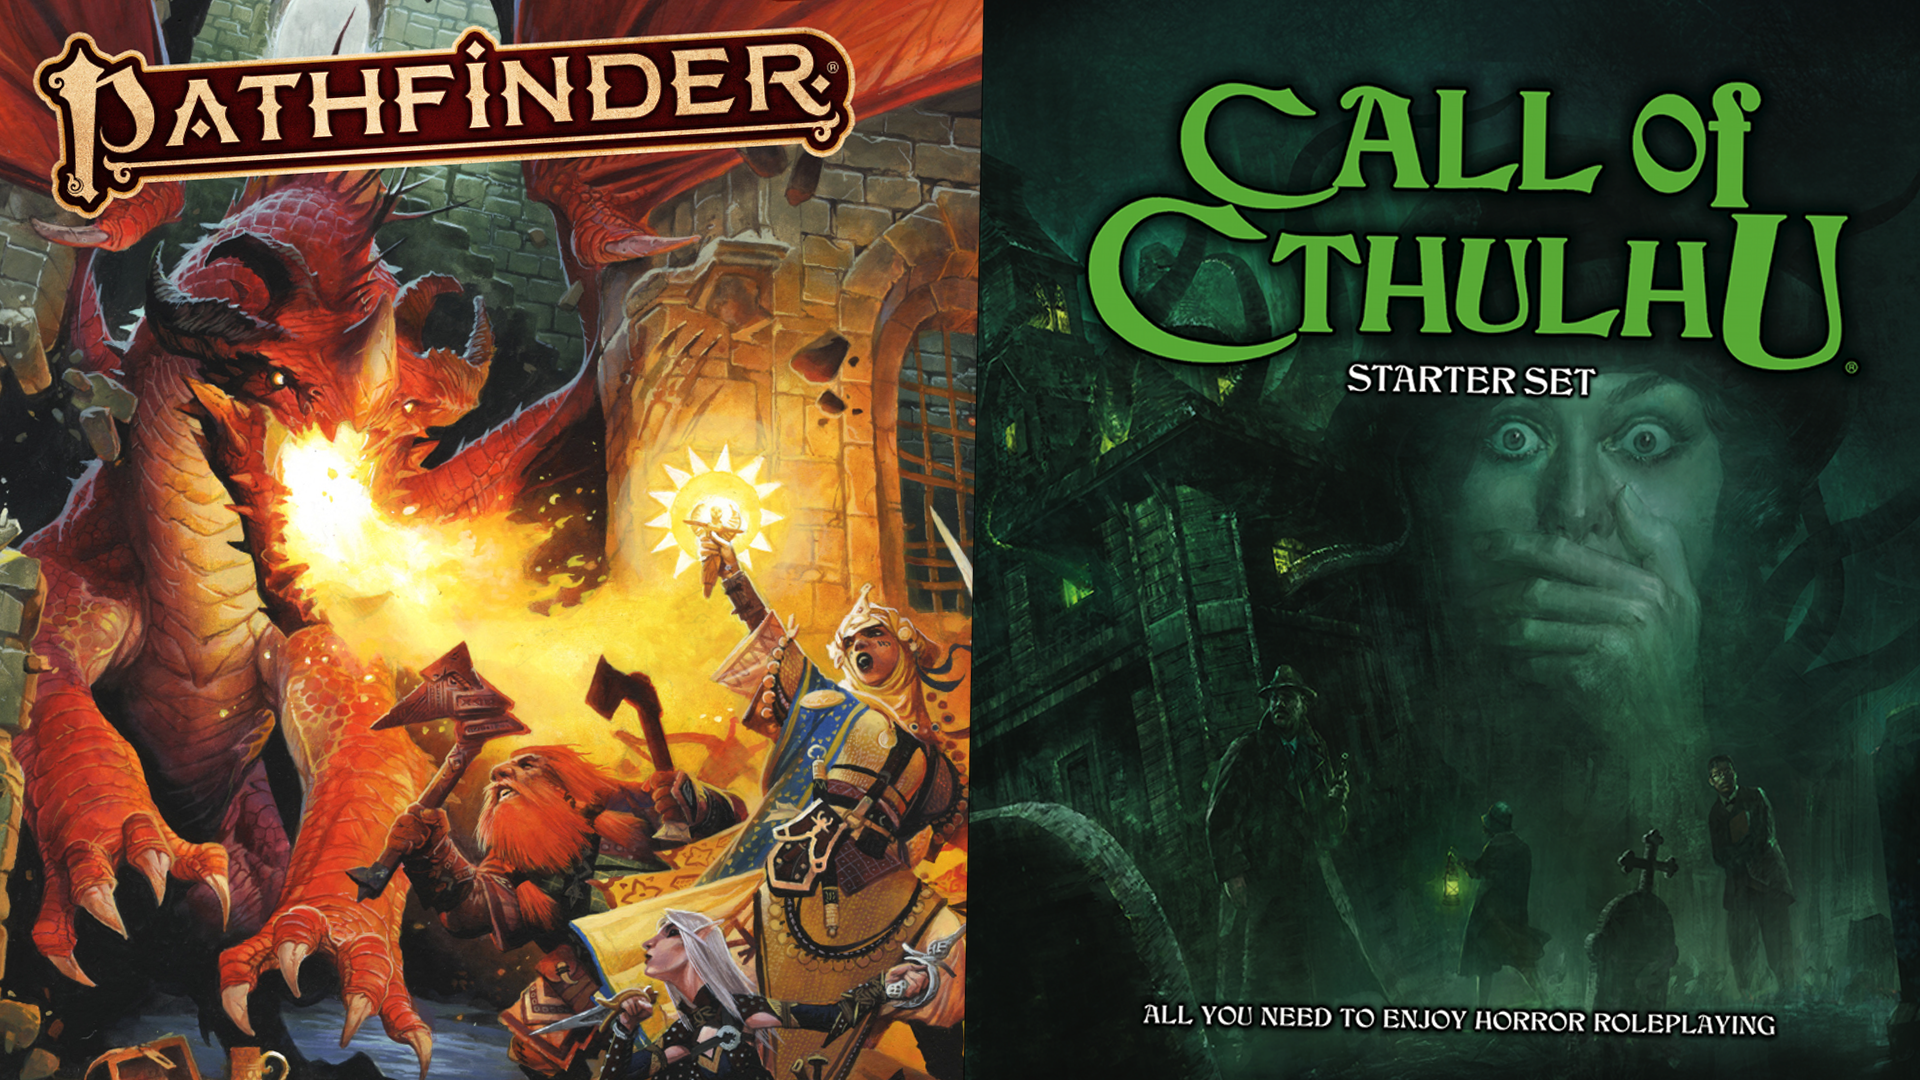 Image for Pathfinder and Call of Cthulhu RPGs sell out months’ worth of books in two weeks after D&D OGL backlash